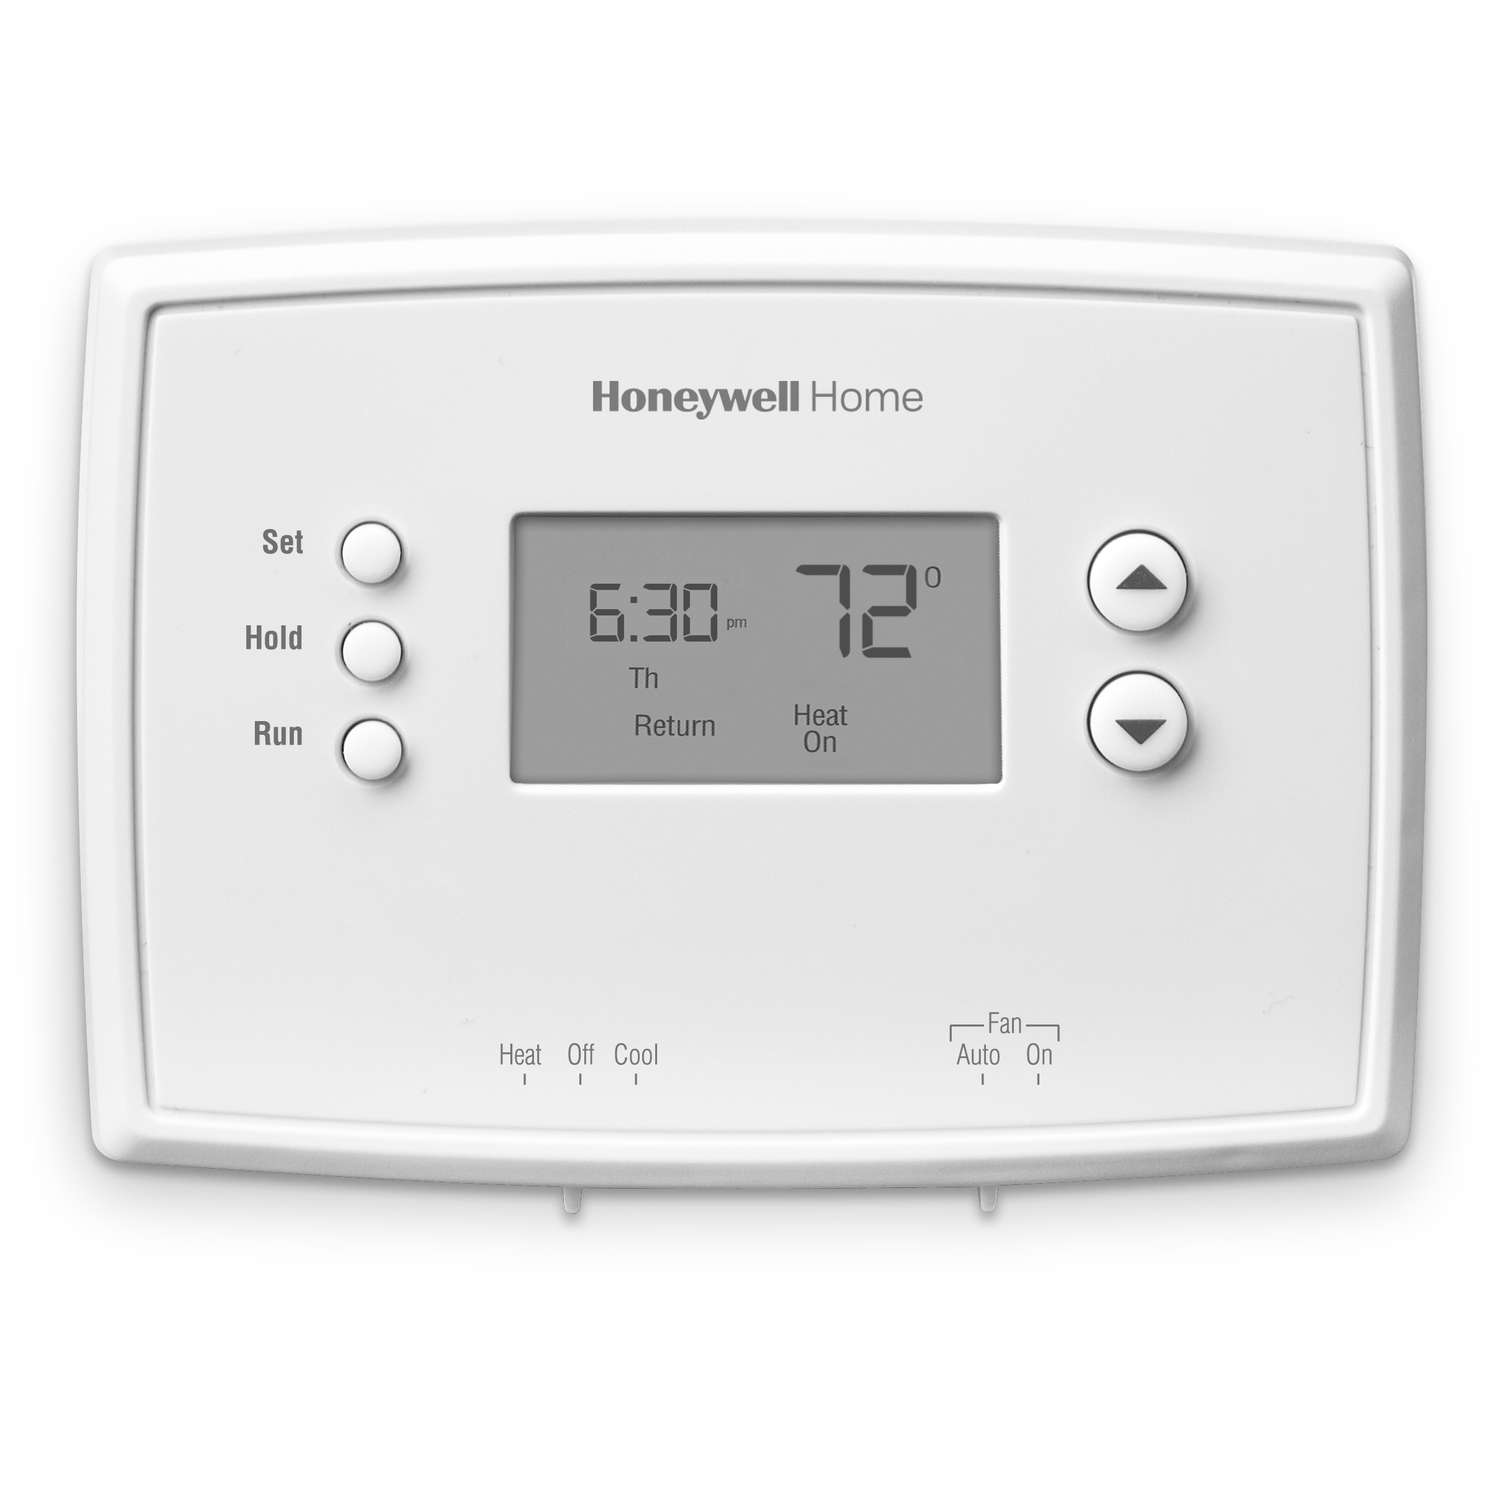 Honeywell Heating and Cooling Push Buttons Programmable